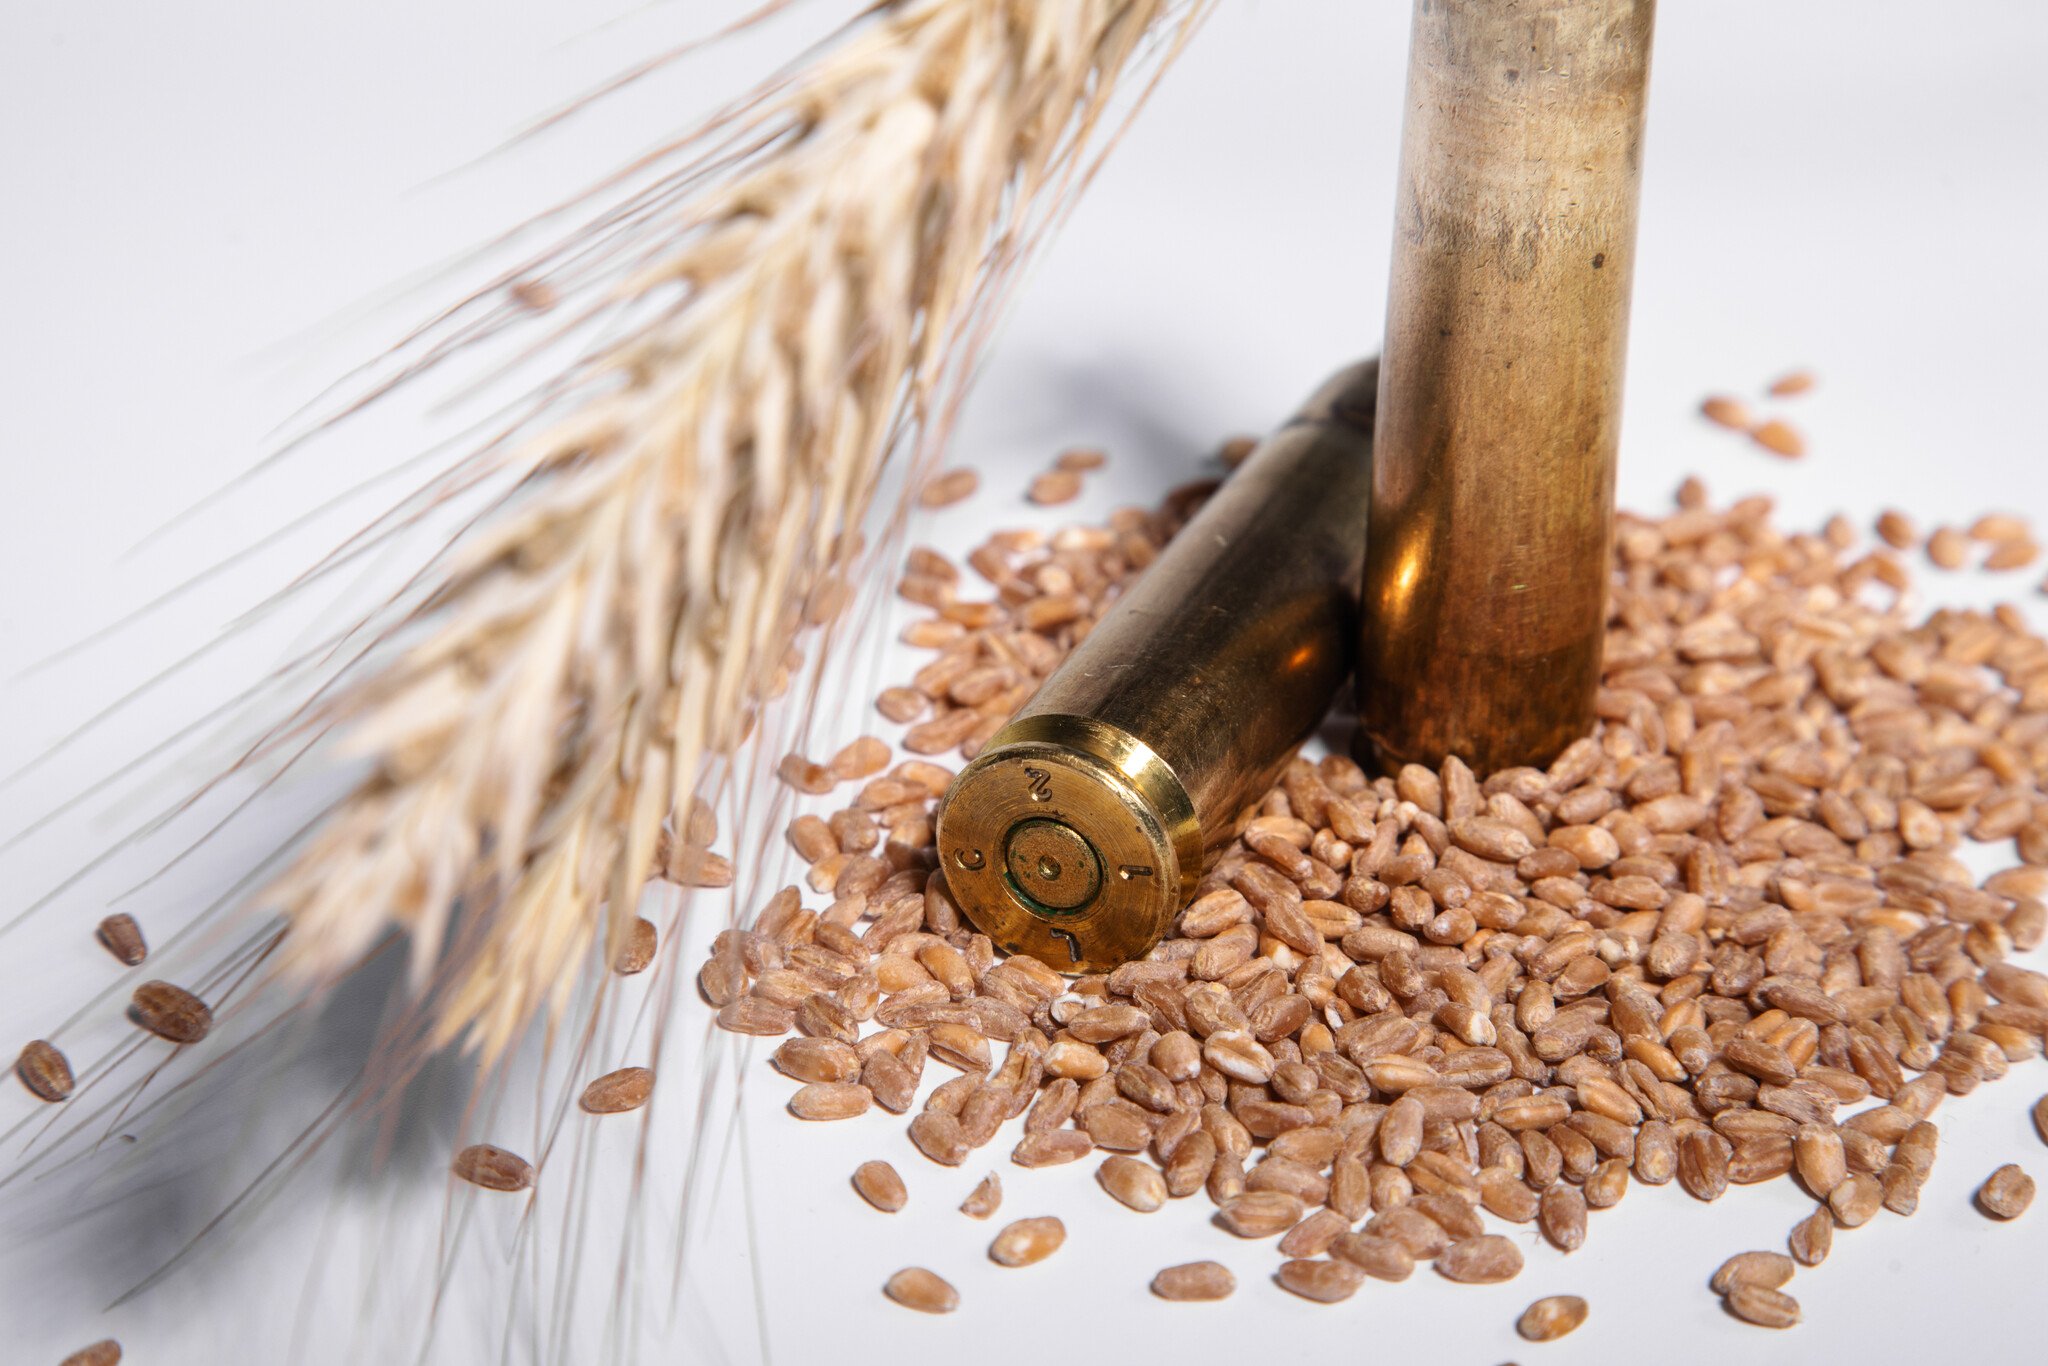 Bullet Grain Explained: What it Means & Why it Matters